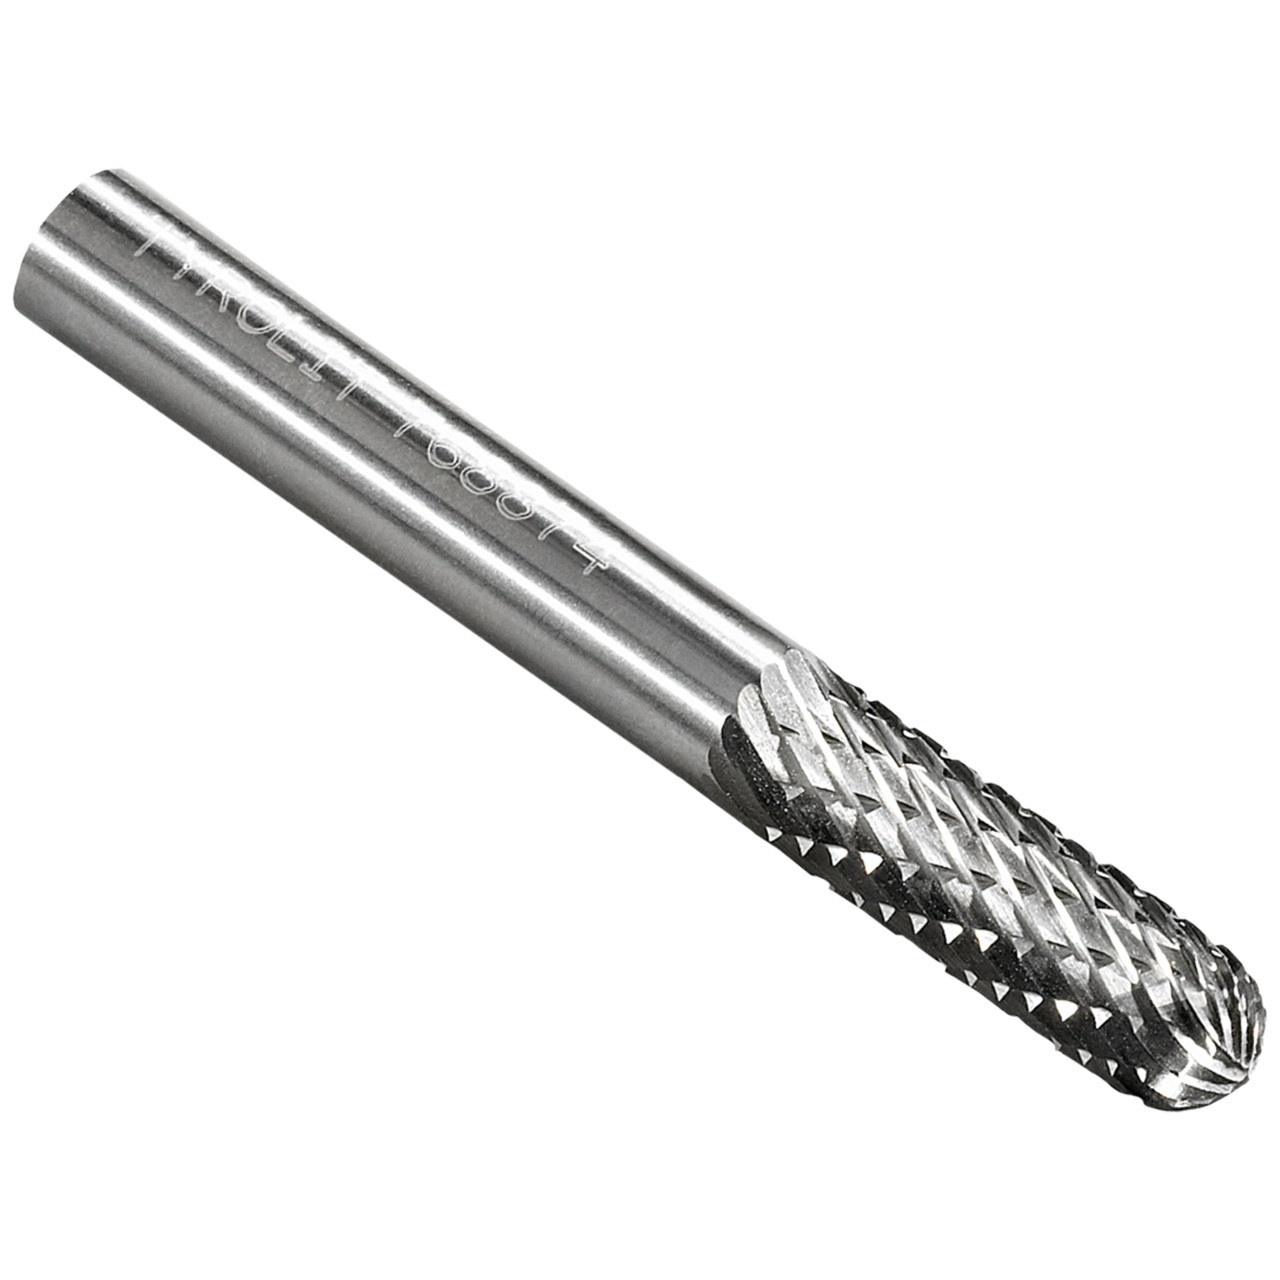 TYROLIT carbide end mill DxT-SxL 12x25-6x70 For cast iron, steel and stainless steel, shape: 52WRC - cylindrical, Art. 766133